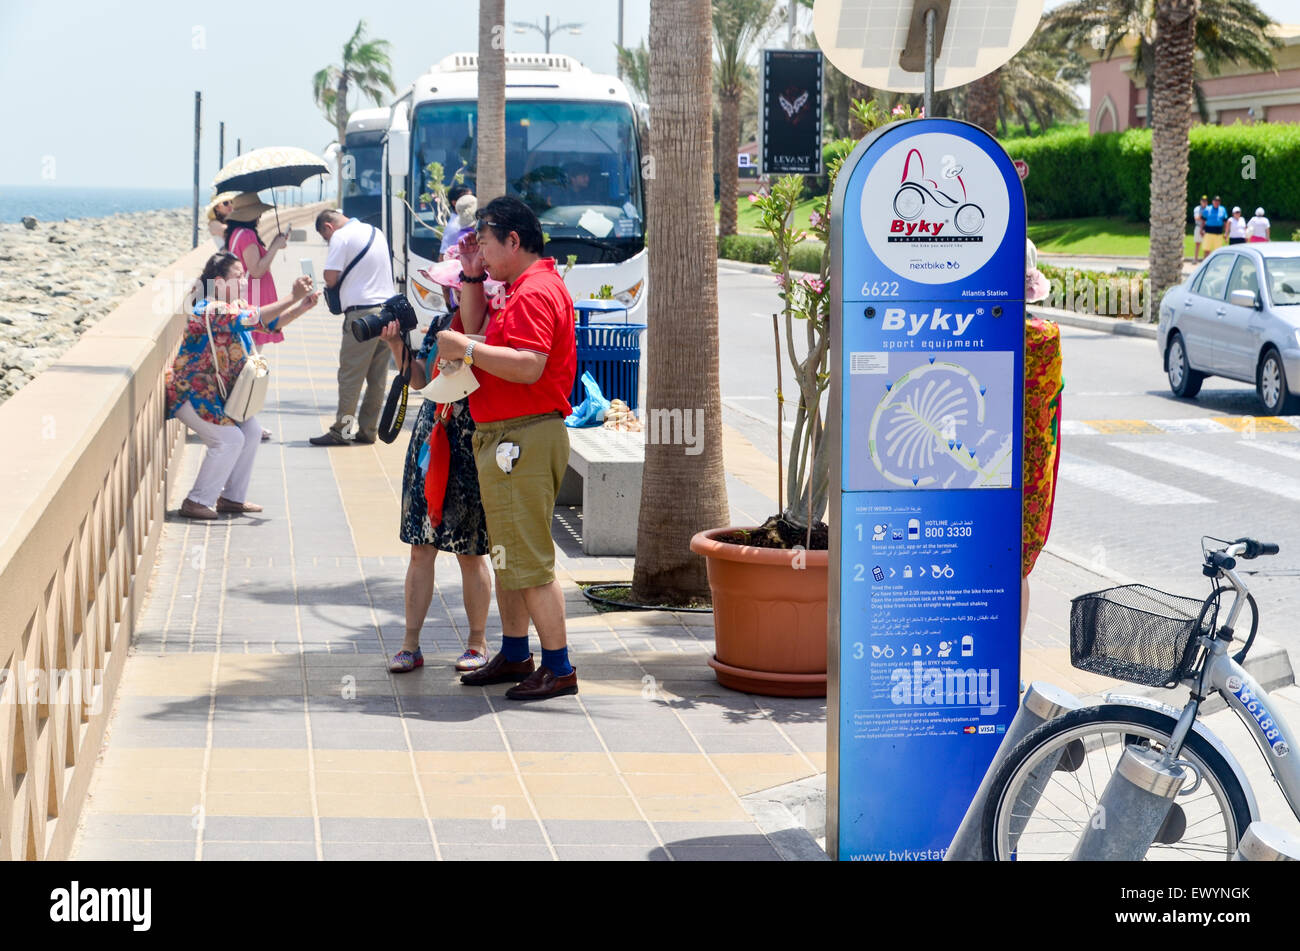 Chinese tourists visiting Dubai, UAE, on Palm Jumeirah artificial island, naer a Byky sign for bicycle rental Stock Photo